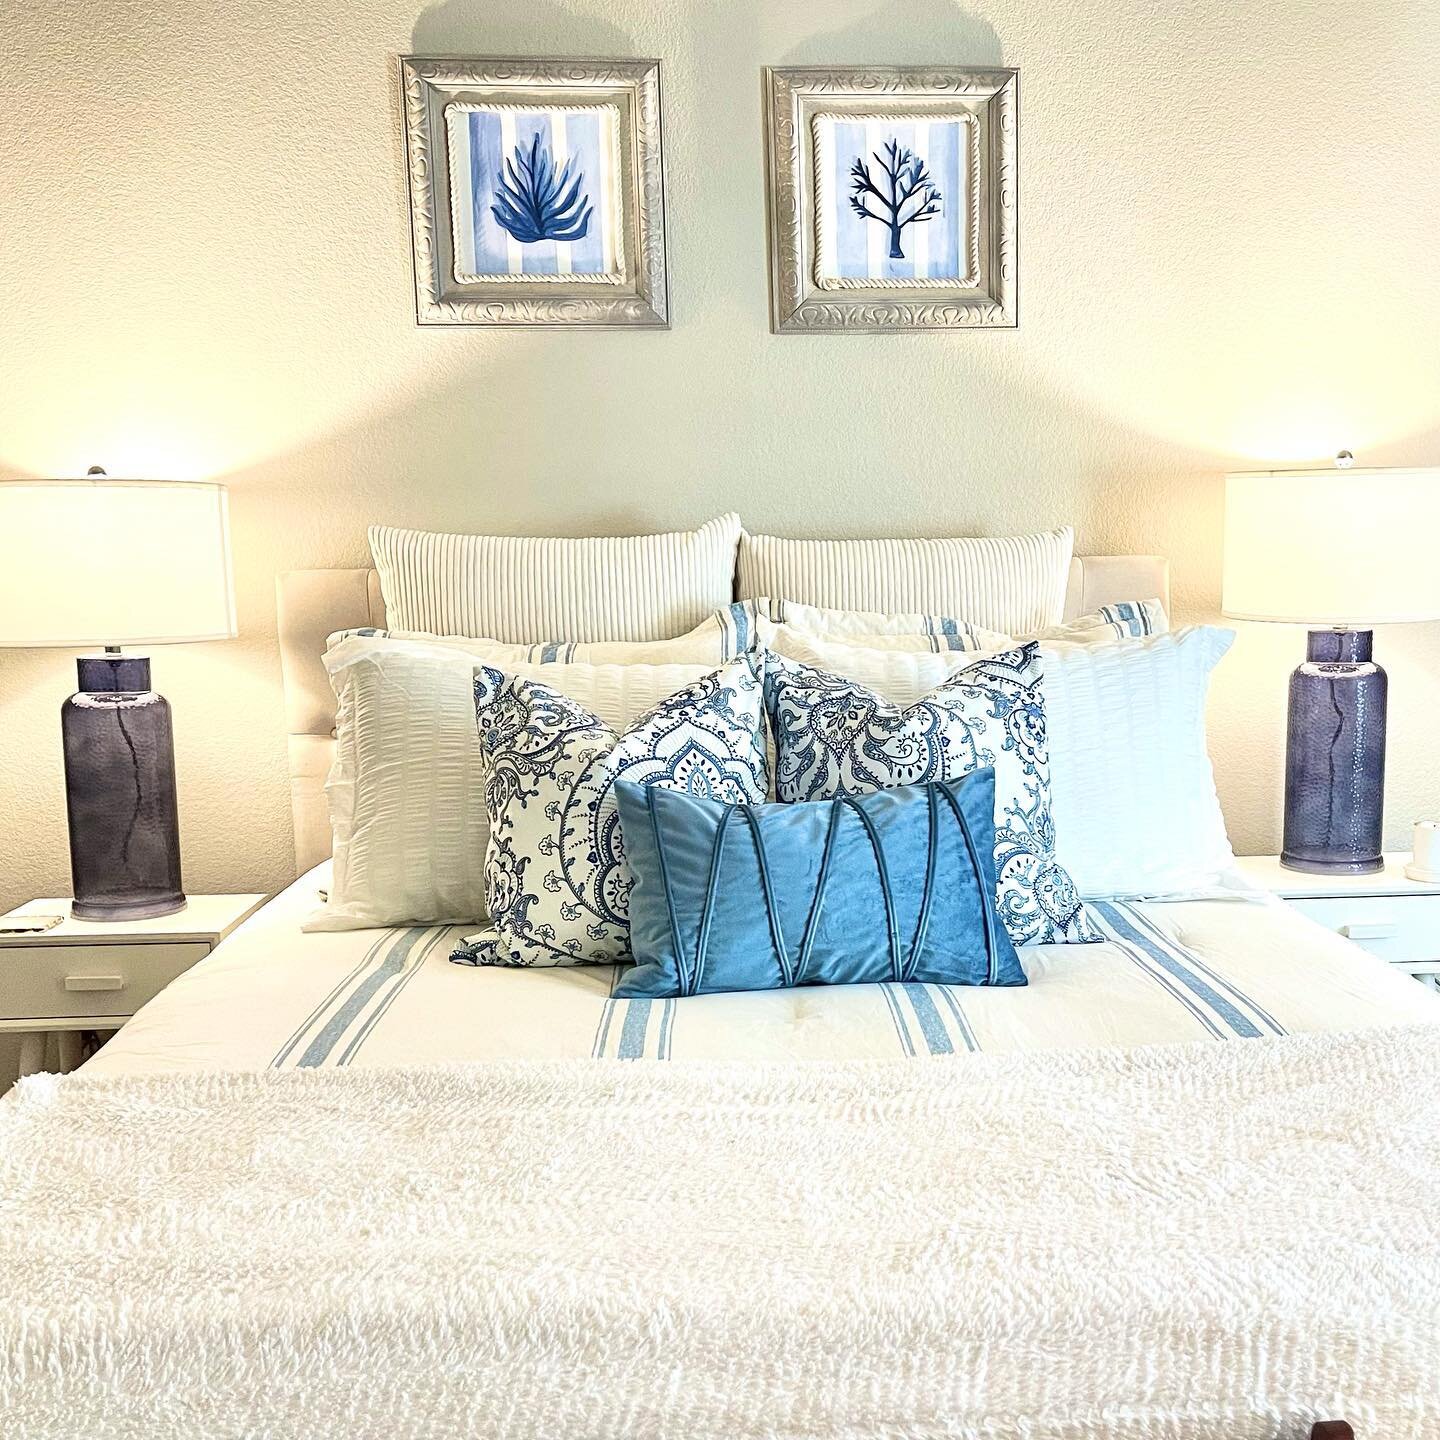 ☀️GET INSPIRED with this guest bedroom before and after! Decorate my Pottery Barn inspired guest room with me to see how I make DIY coastal home decor work, without being over the top beachy.
⁣⁣⁣⁣⁣⁣⁣⁣⁣⁣⁣⁣
⤴️ 𝐈 𝐝𝐨 𝐜𝐫𝐚𝐟𝐭𝐬 𝐚𝐧𝐝 𝐡𝐨𝐦𝐞 𝐝𝐞?